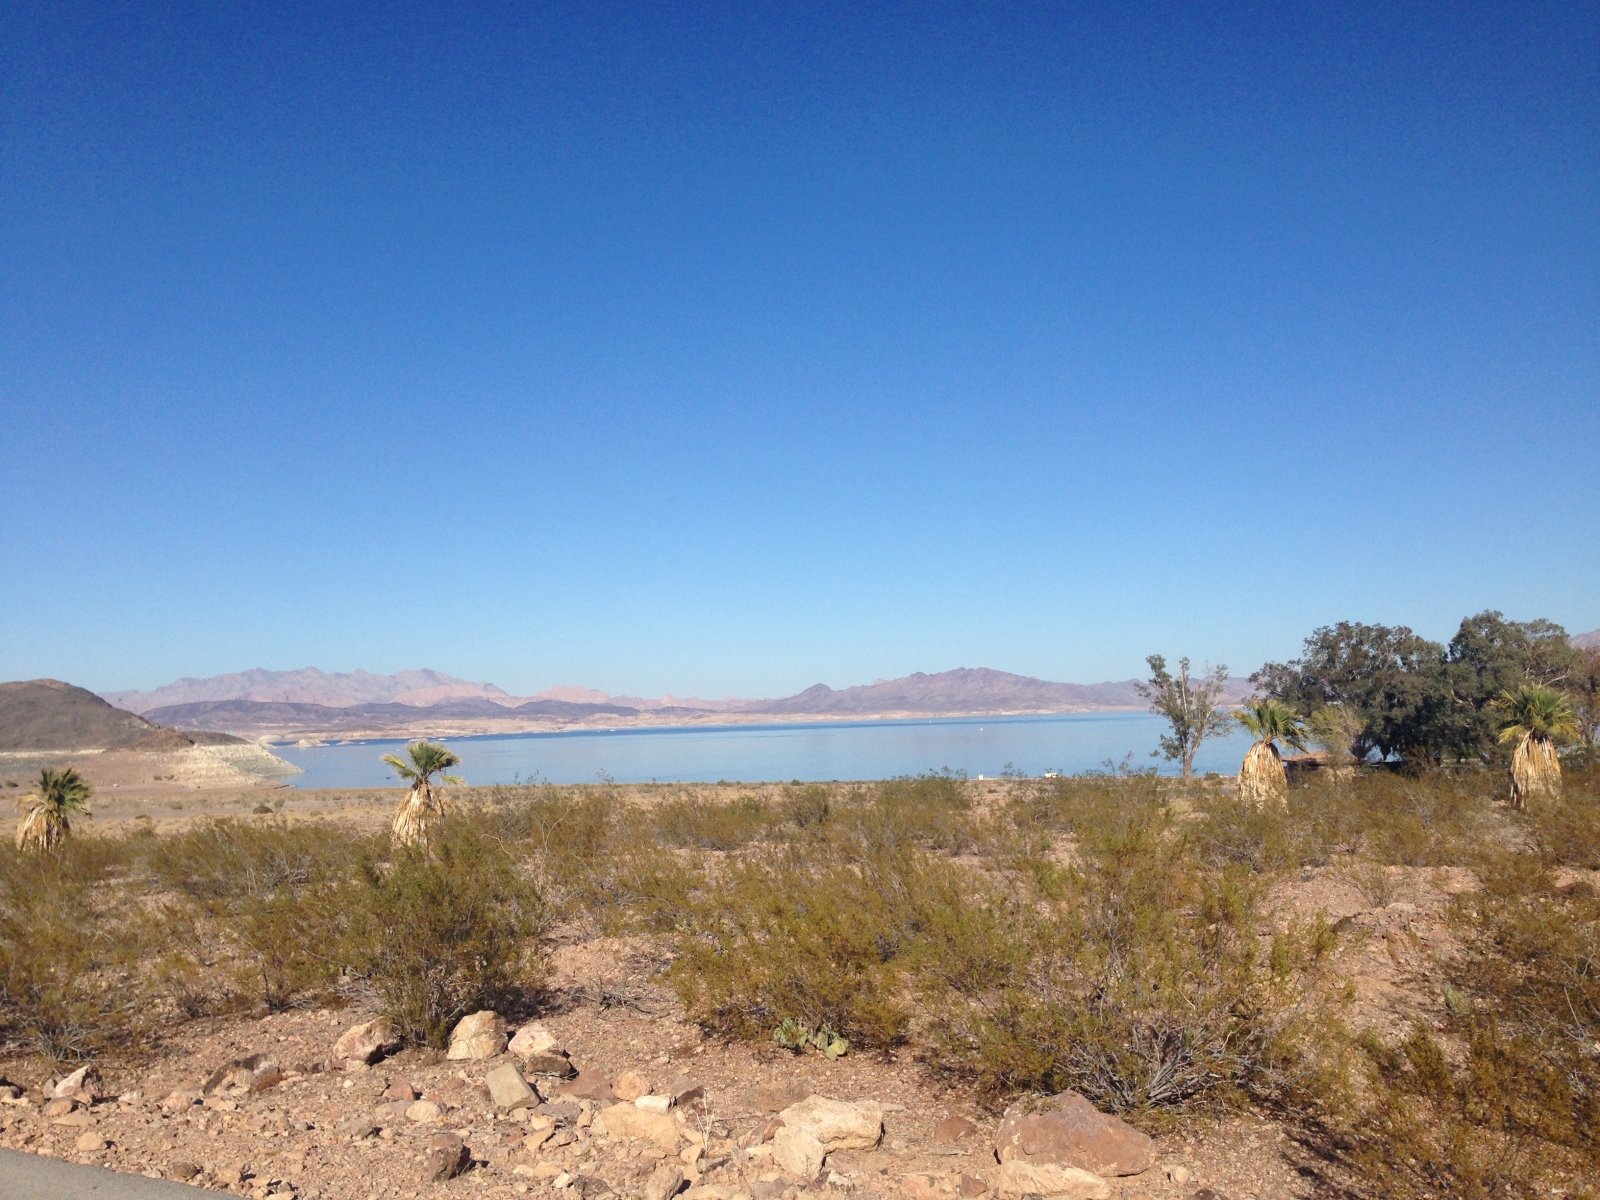 Looking at Lake Mead.  Marina is just to the right.